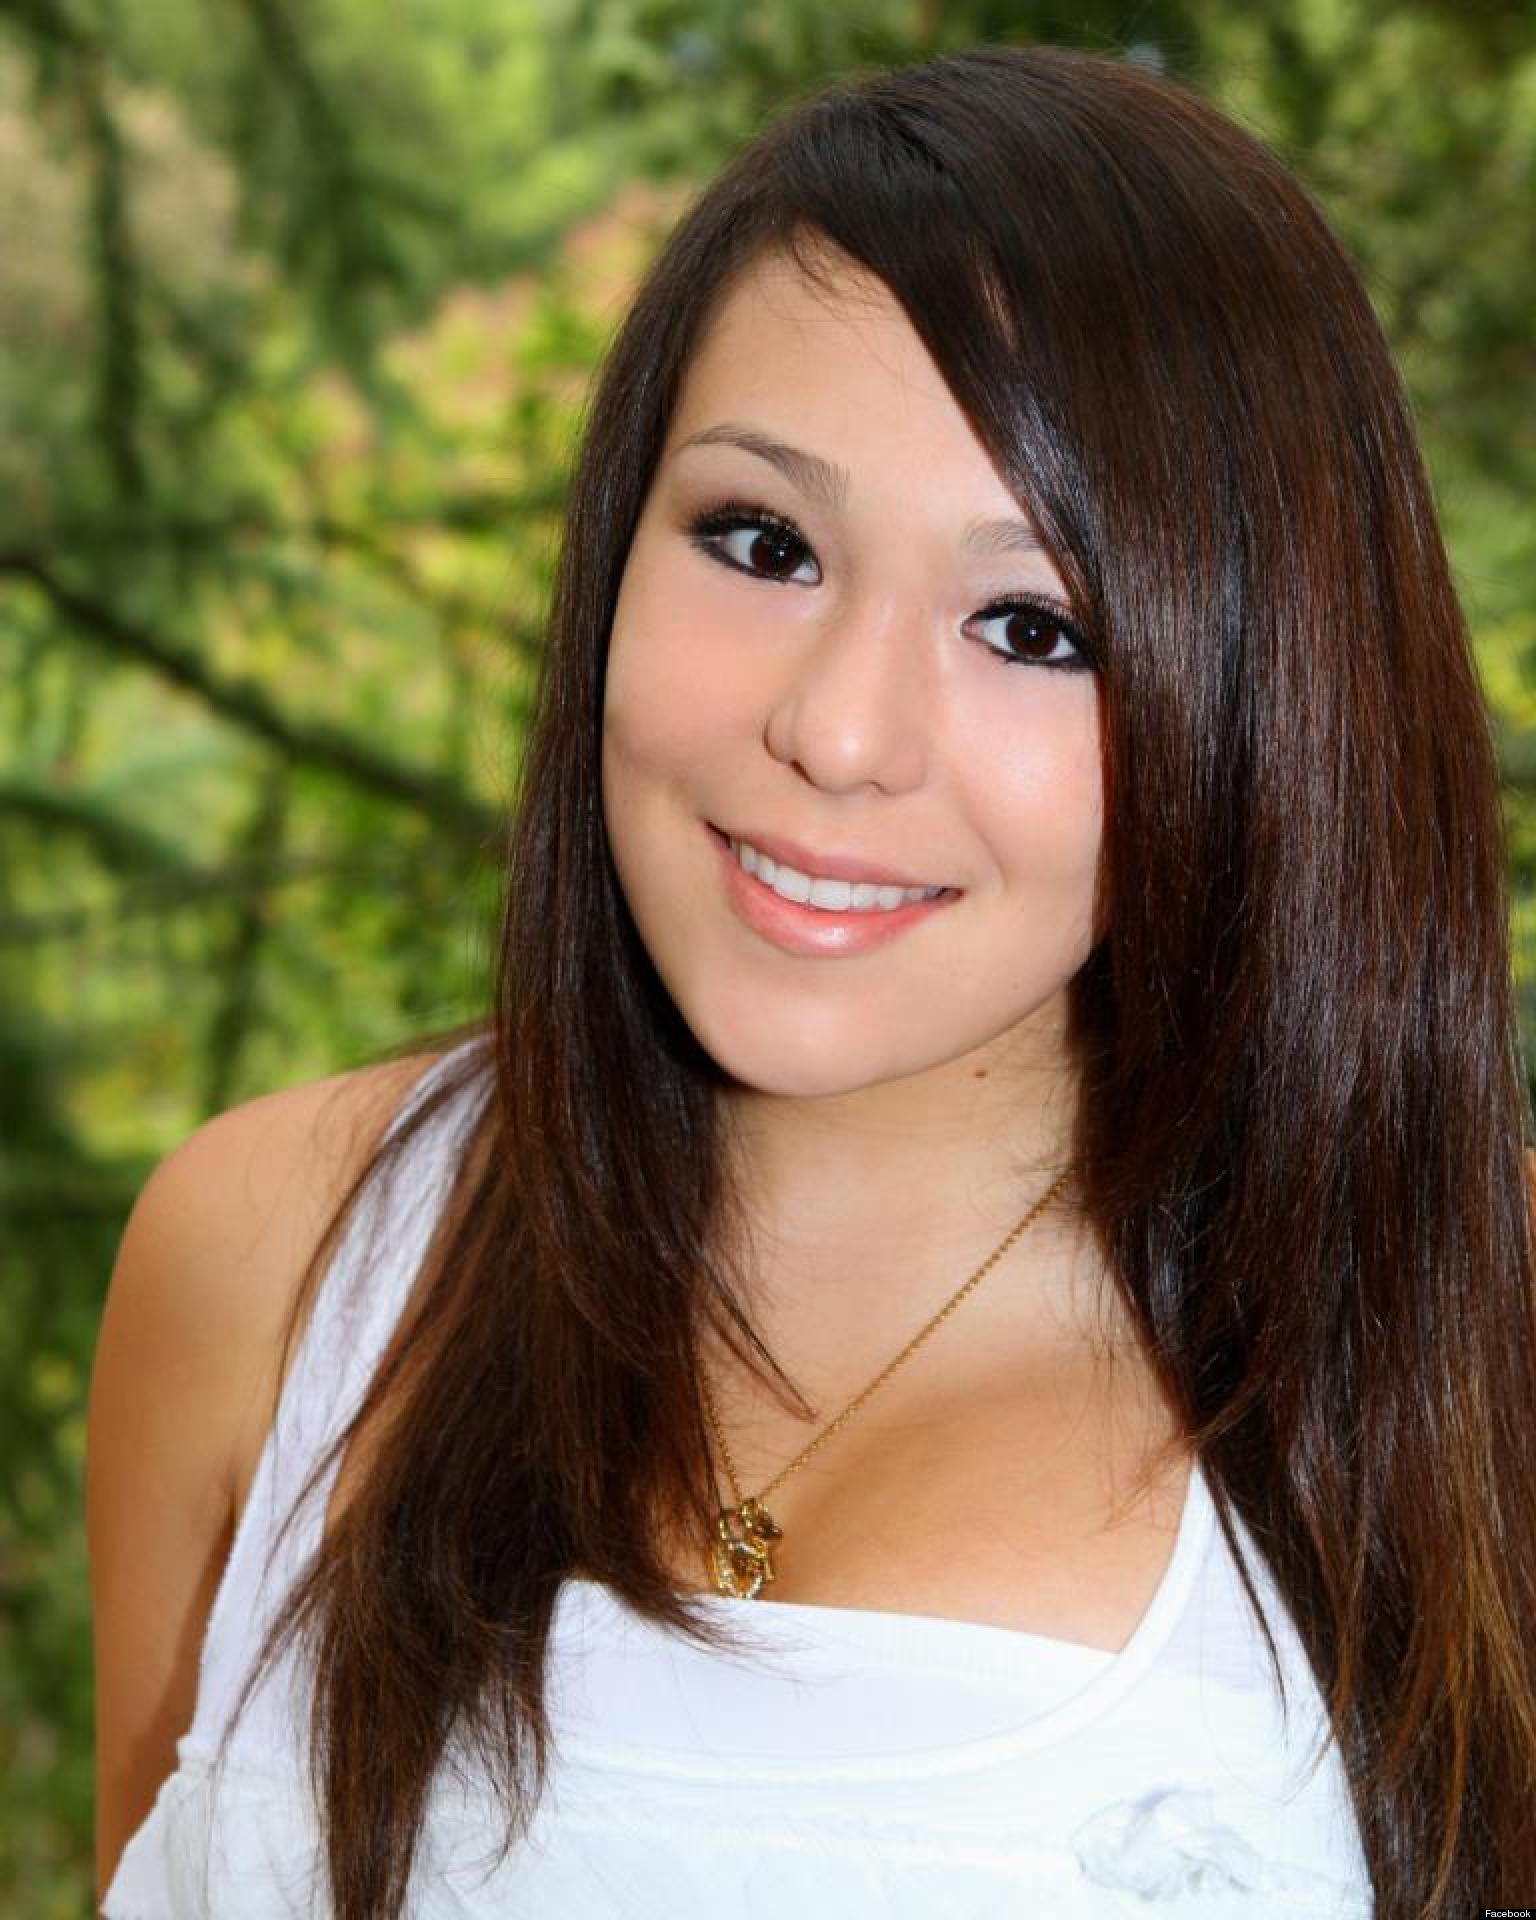 Audrie Pott Sexual Battery Suspects Arrested 3 Teens